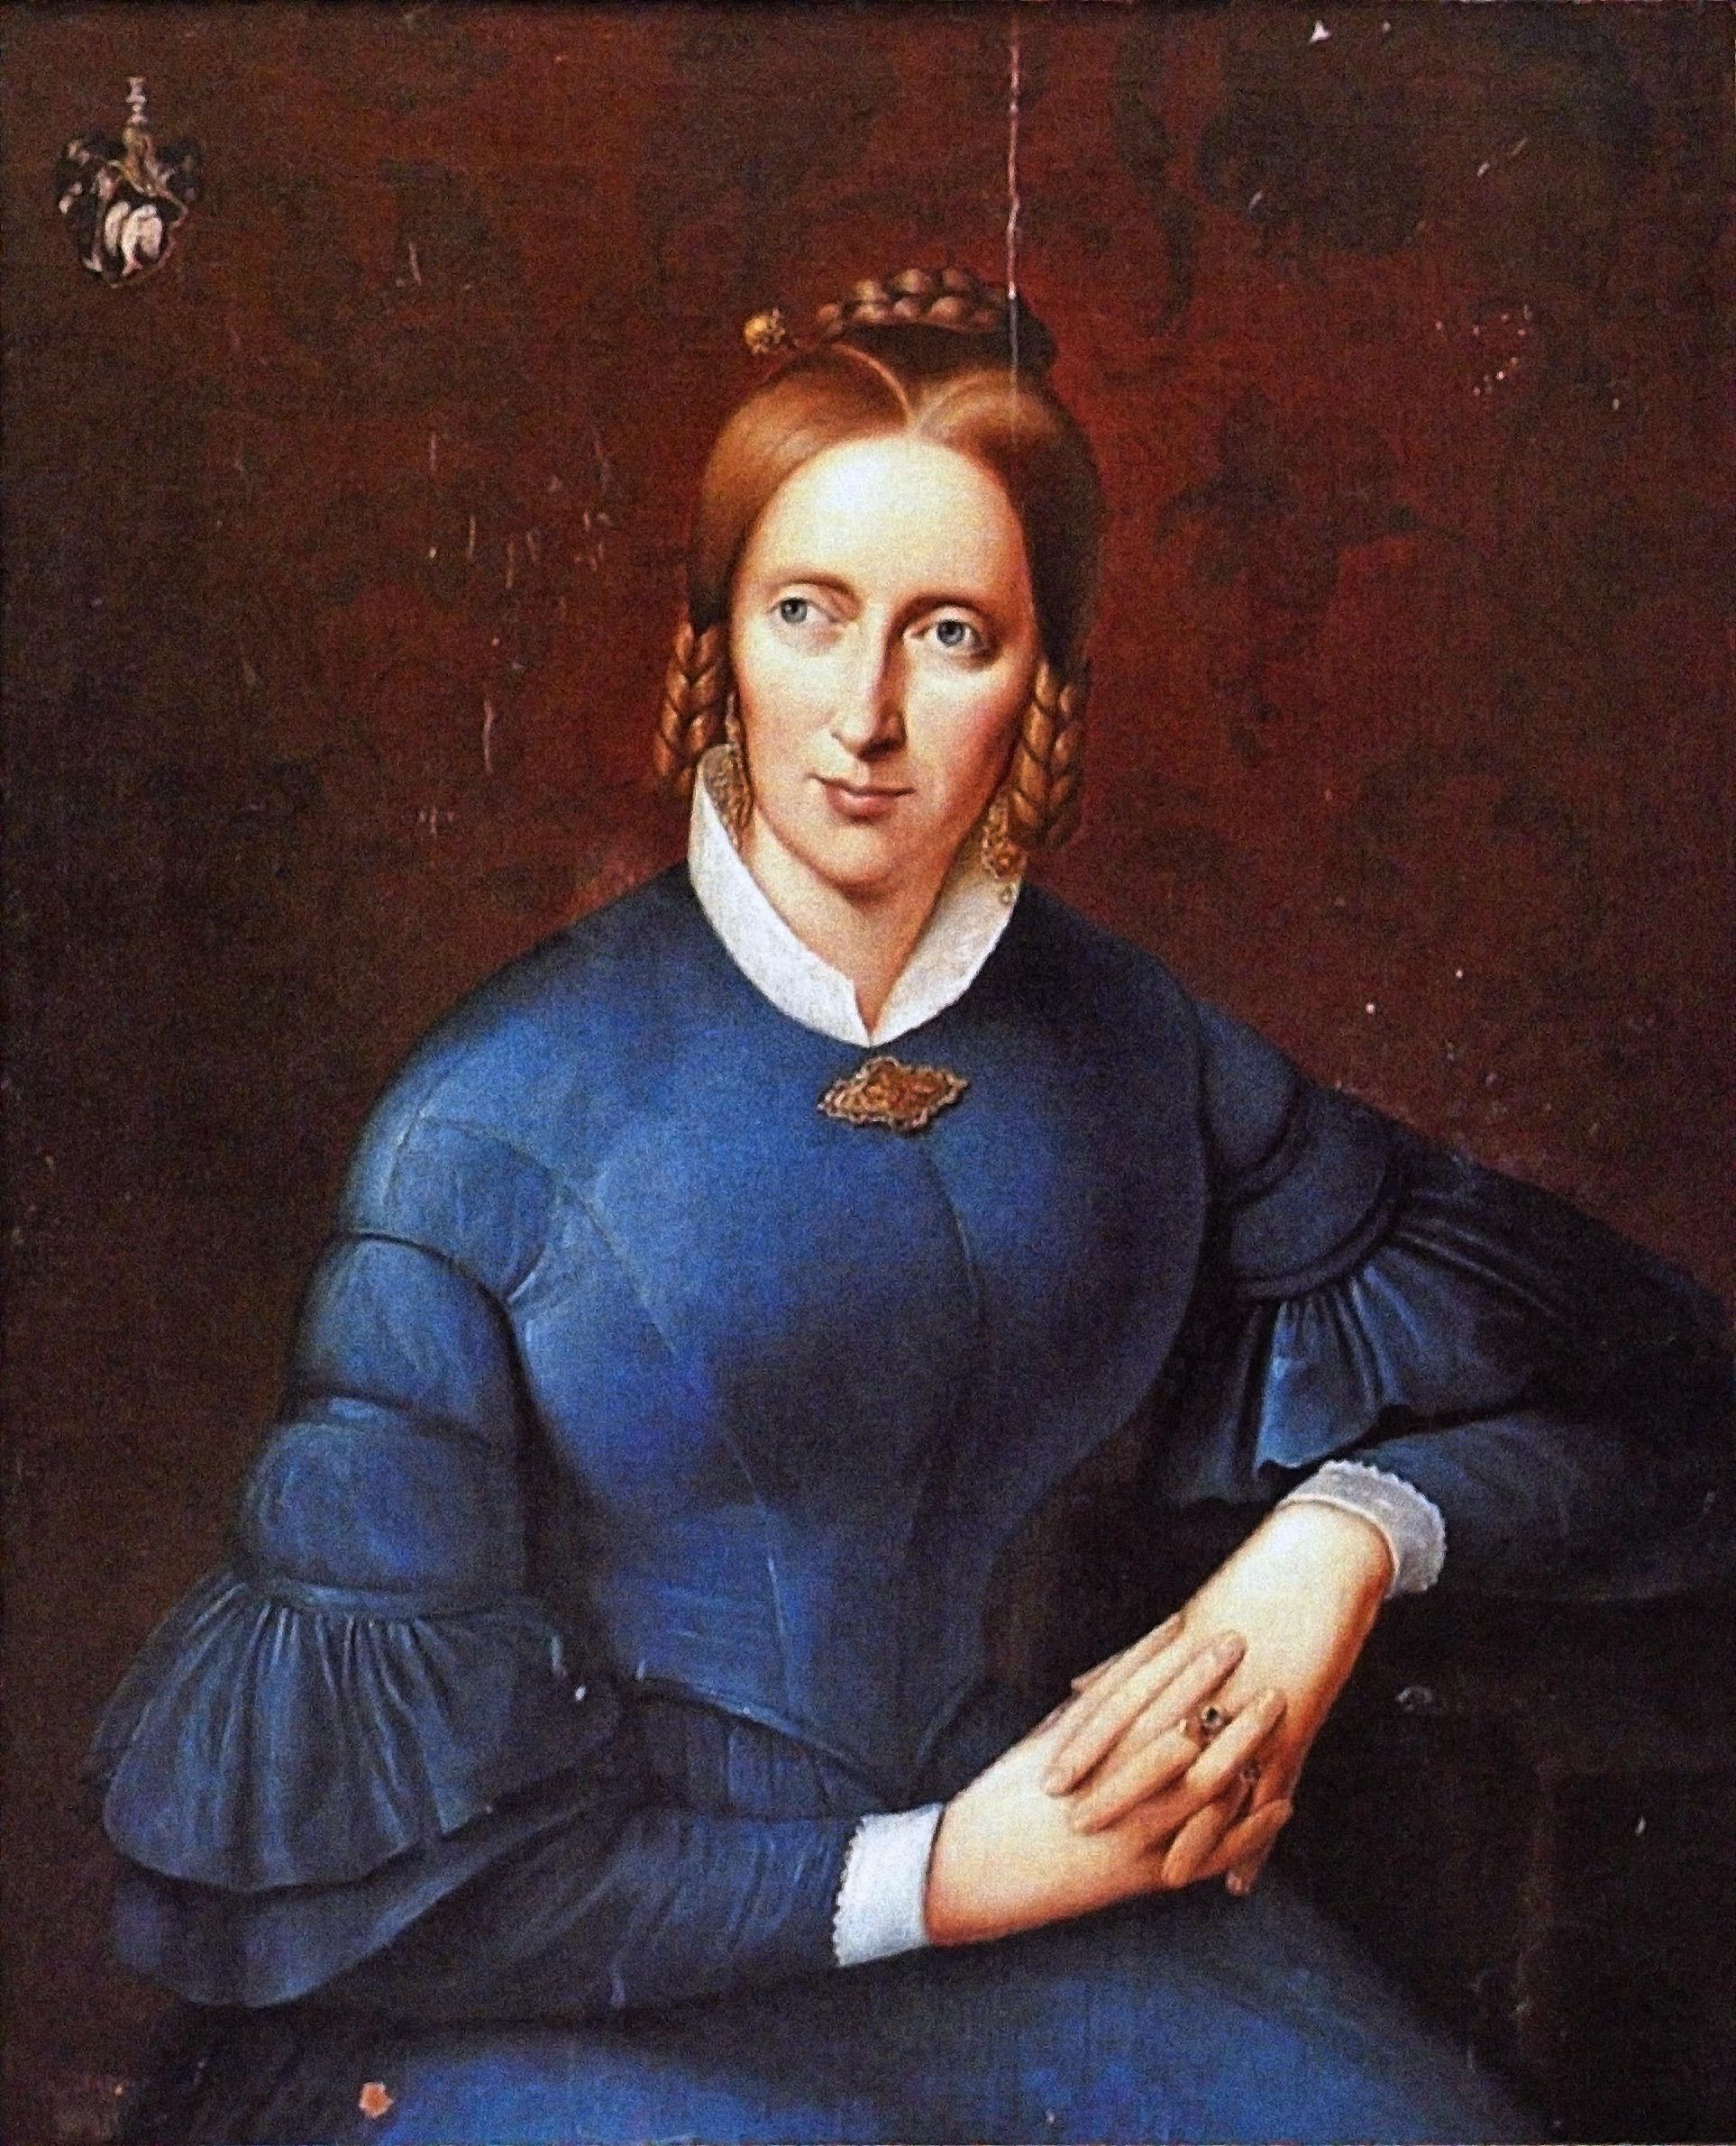 An oil painting of Annette von Droste Hülshoff, a white woman in a blue dress against a dark background